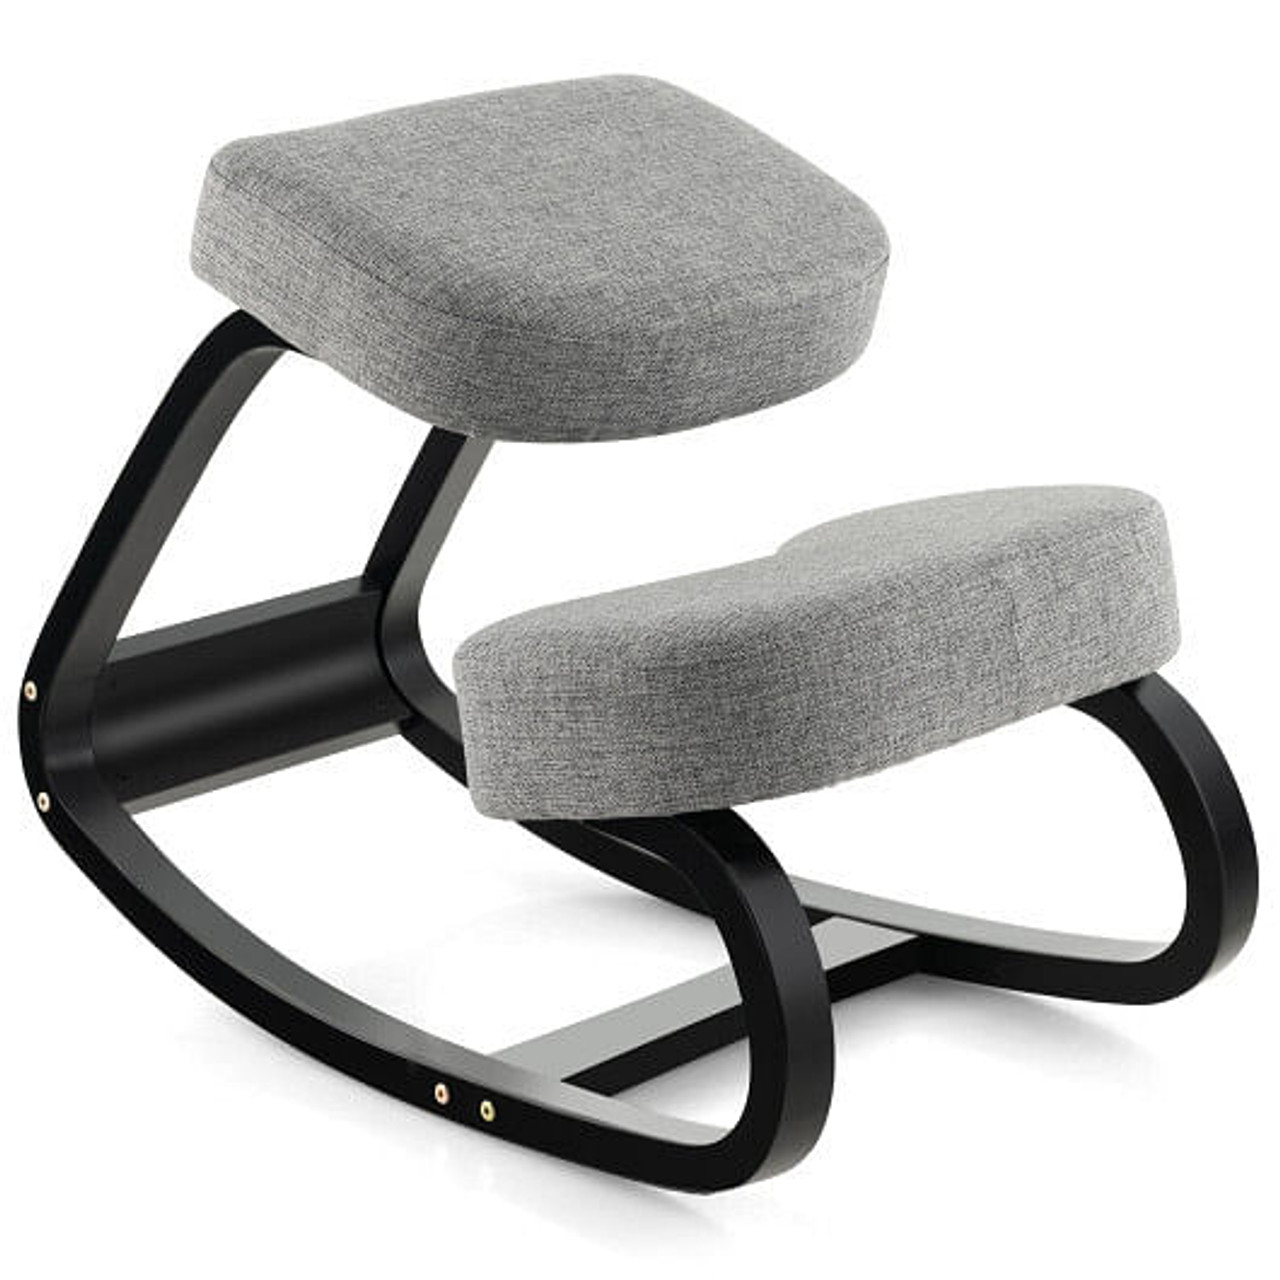 Rocking Ergonomic Kneeling Chair with Padded Cushion for Home Office-Gray